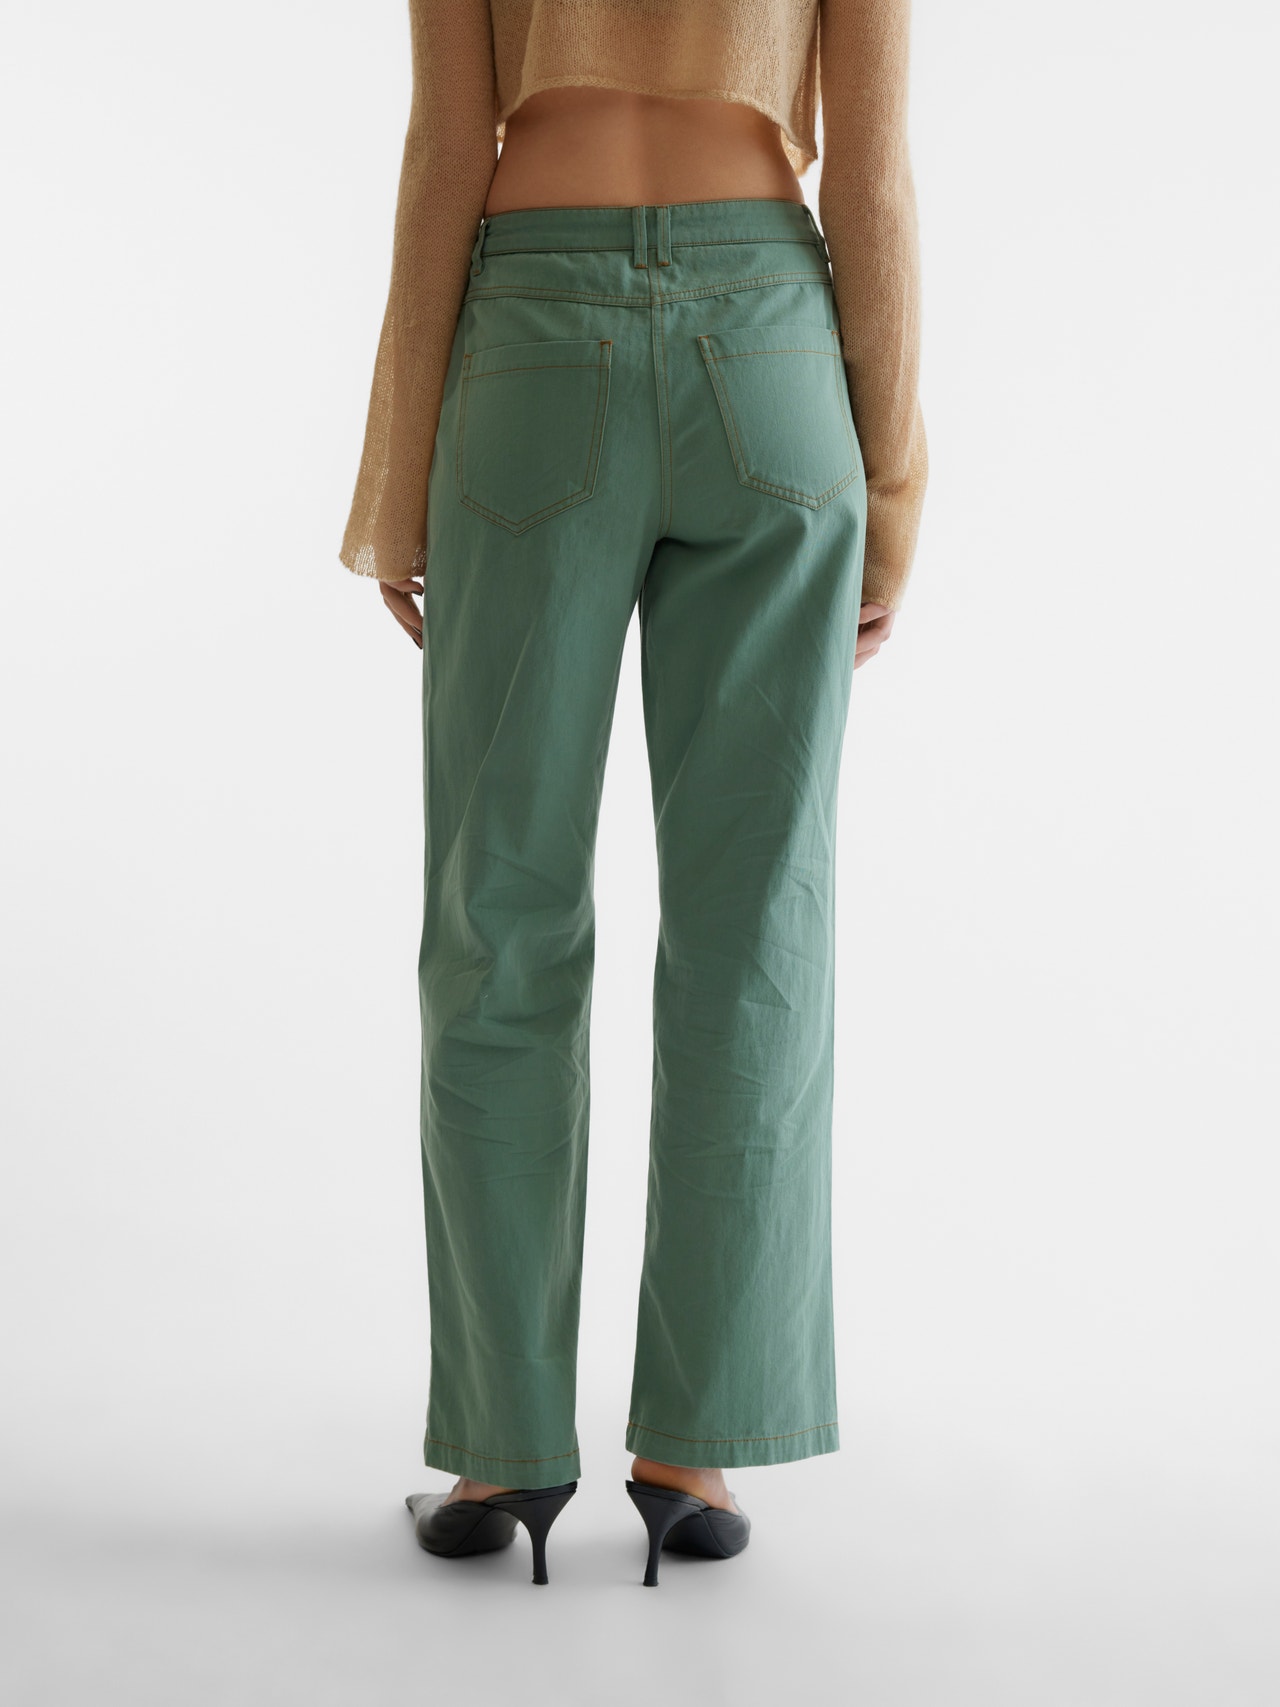 Vero Moda SOMETHING NEW PROJECT; CHLOE FRATER  Jeans -Watercress - 10304106